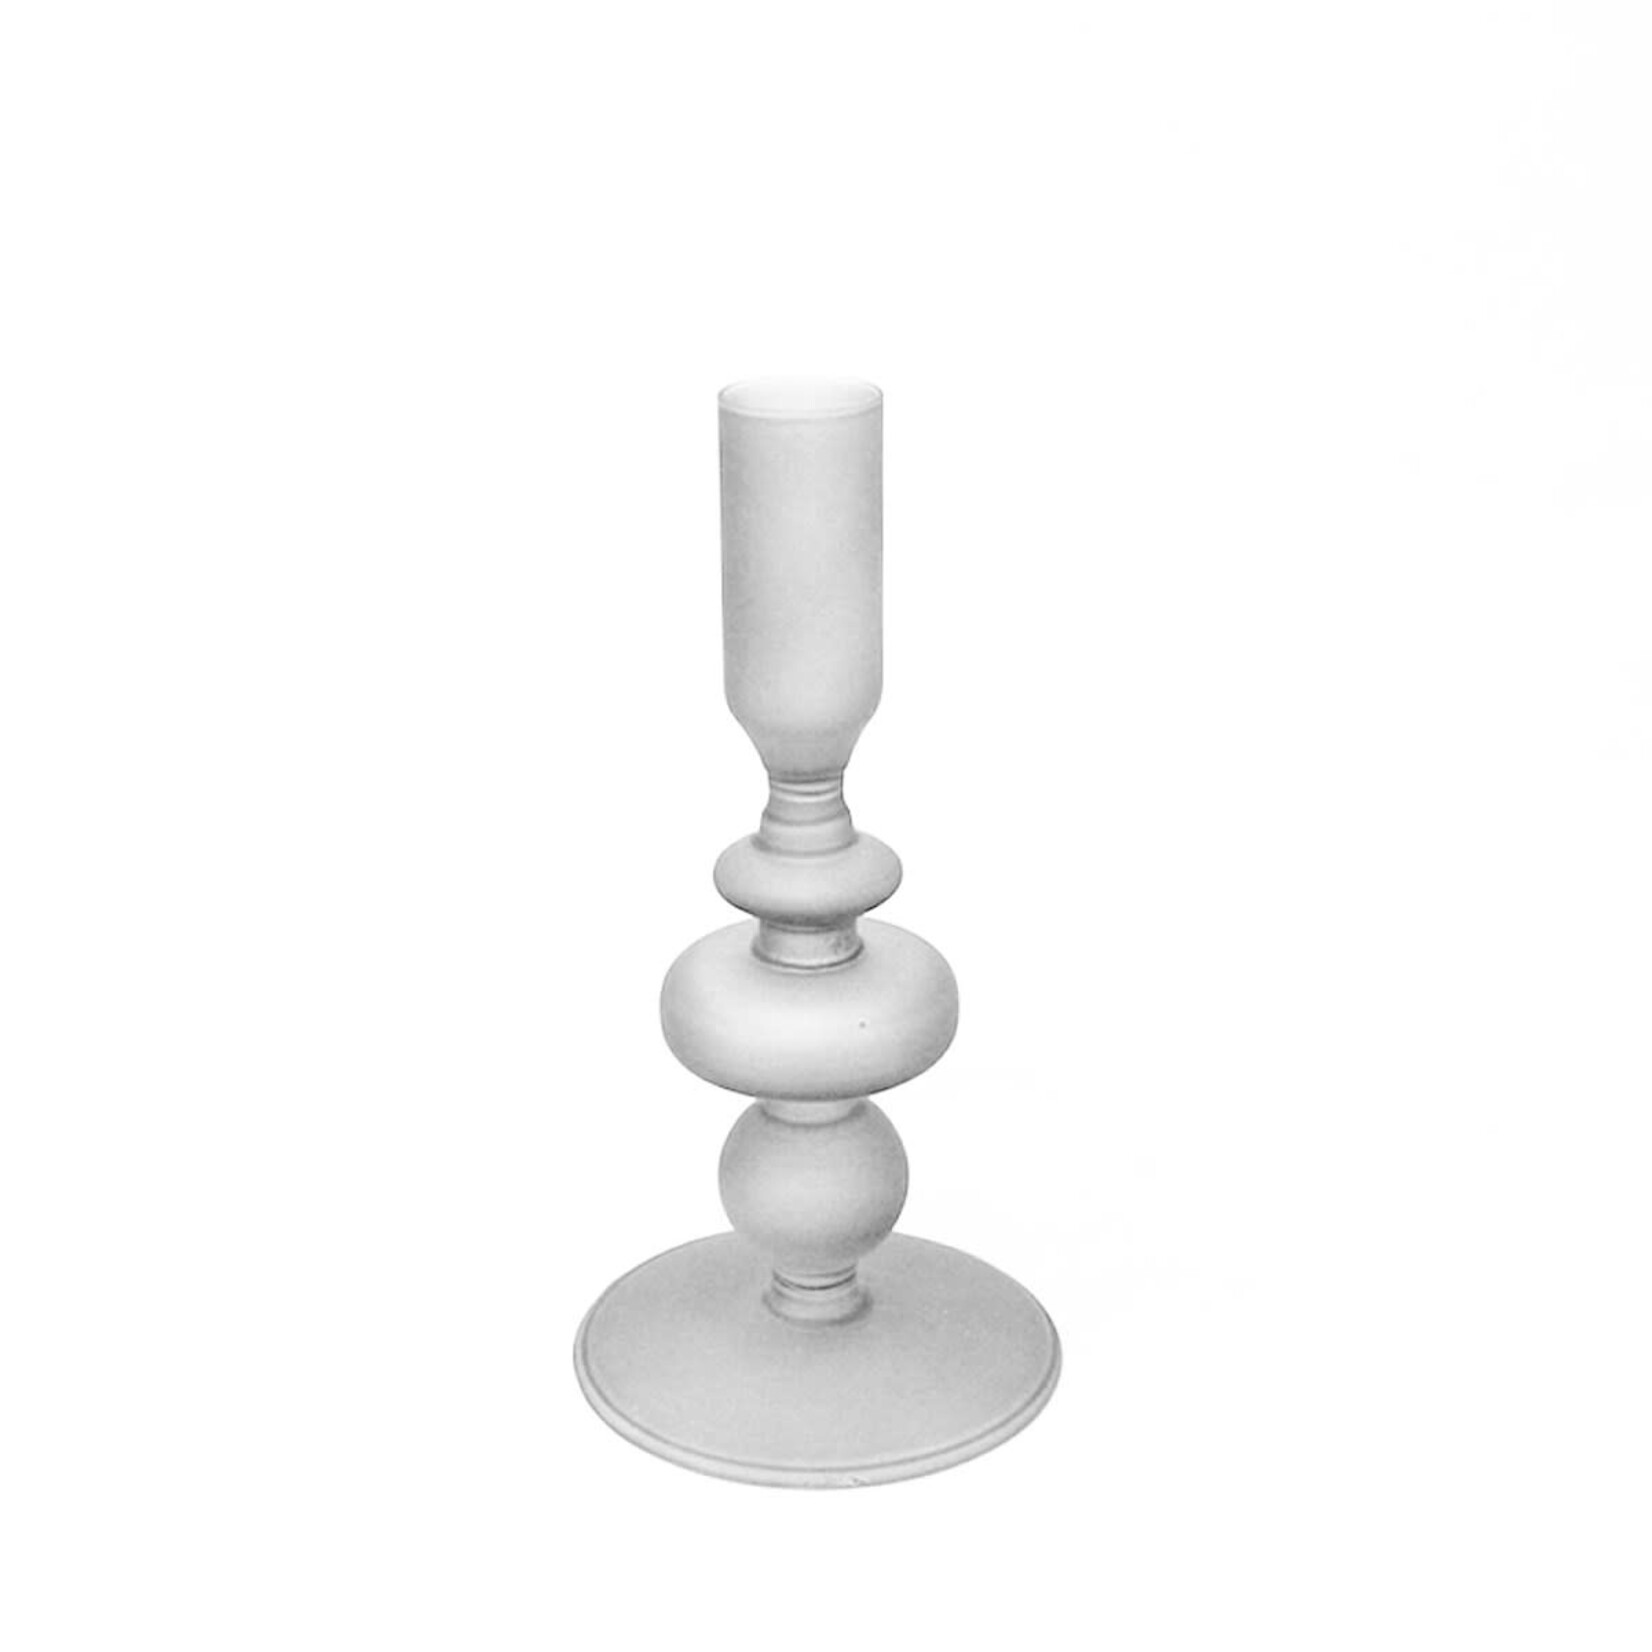 Frosted White Candleholder - 7"